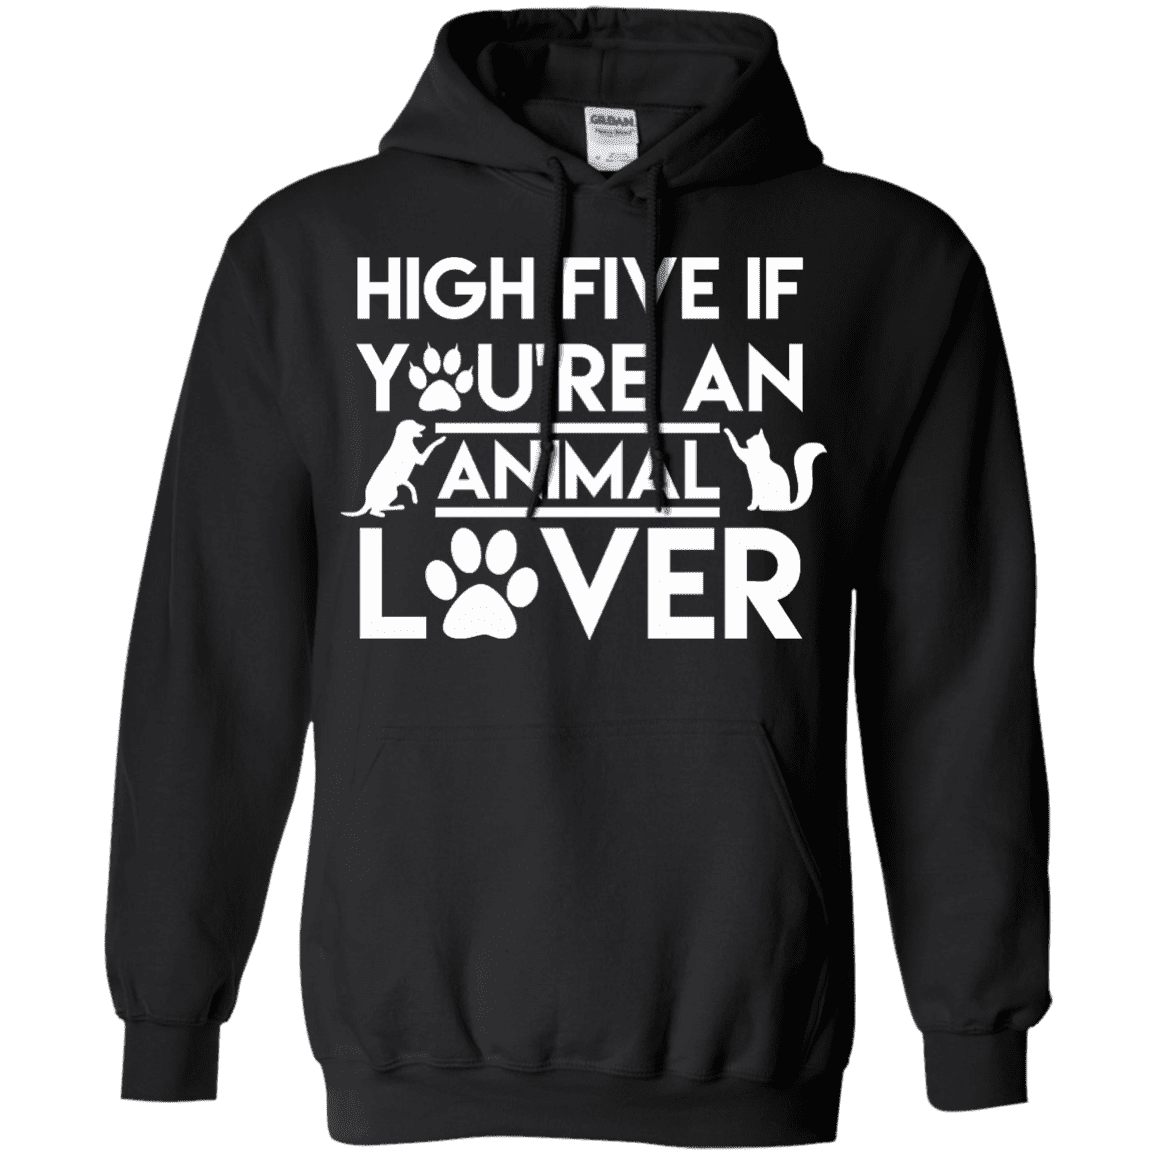 High Five If You're An Animal Lover - Hoodie.